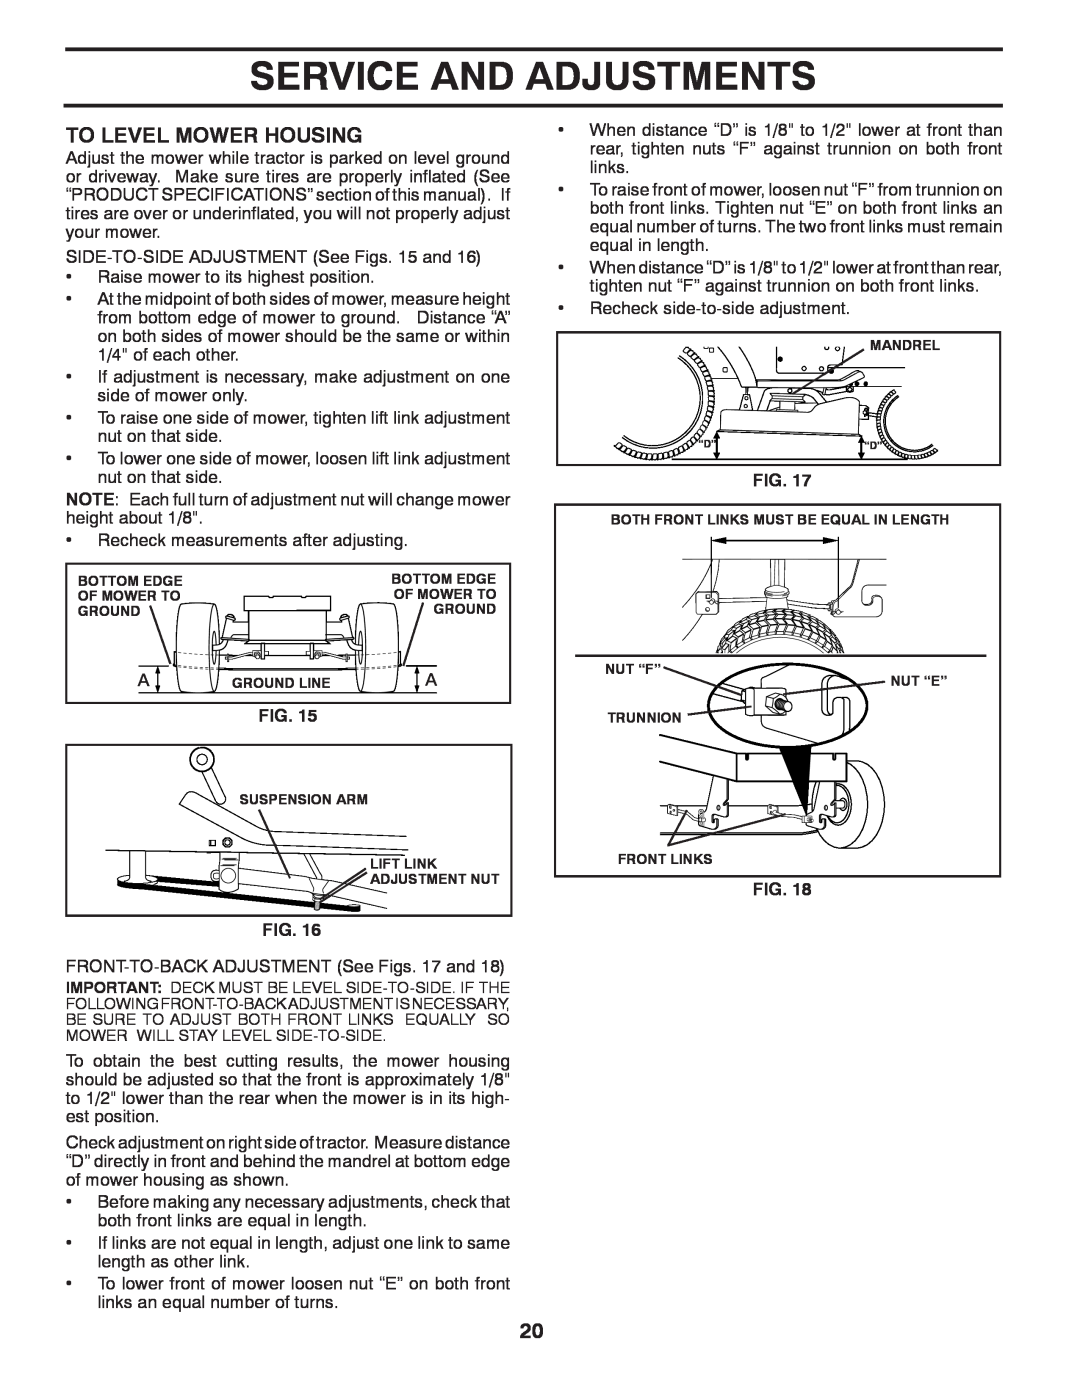 Poulan 96012010900, 433507 manual To Level Mower Housing, Service And Adjustments 